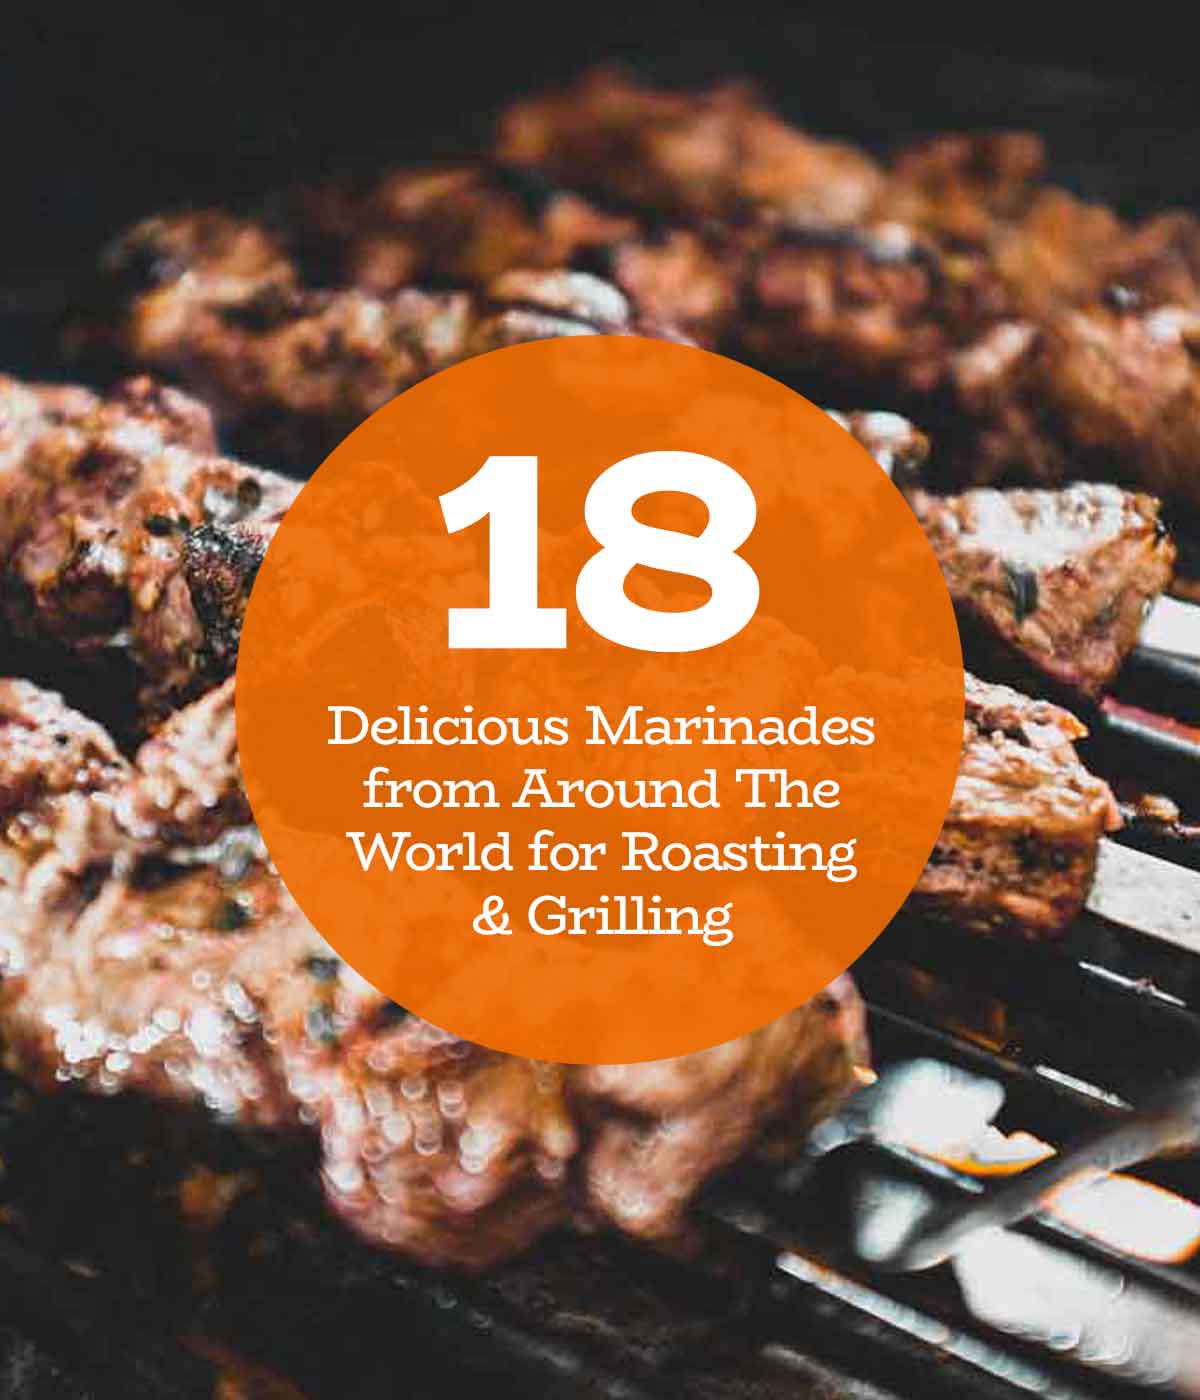 18 Delicious Marinades from around the World for Roasting & Grilling